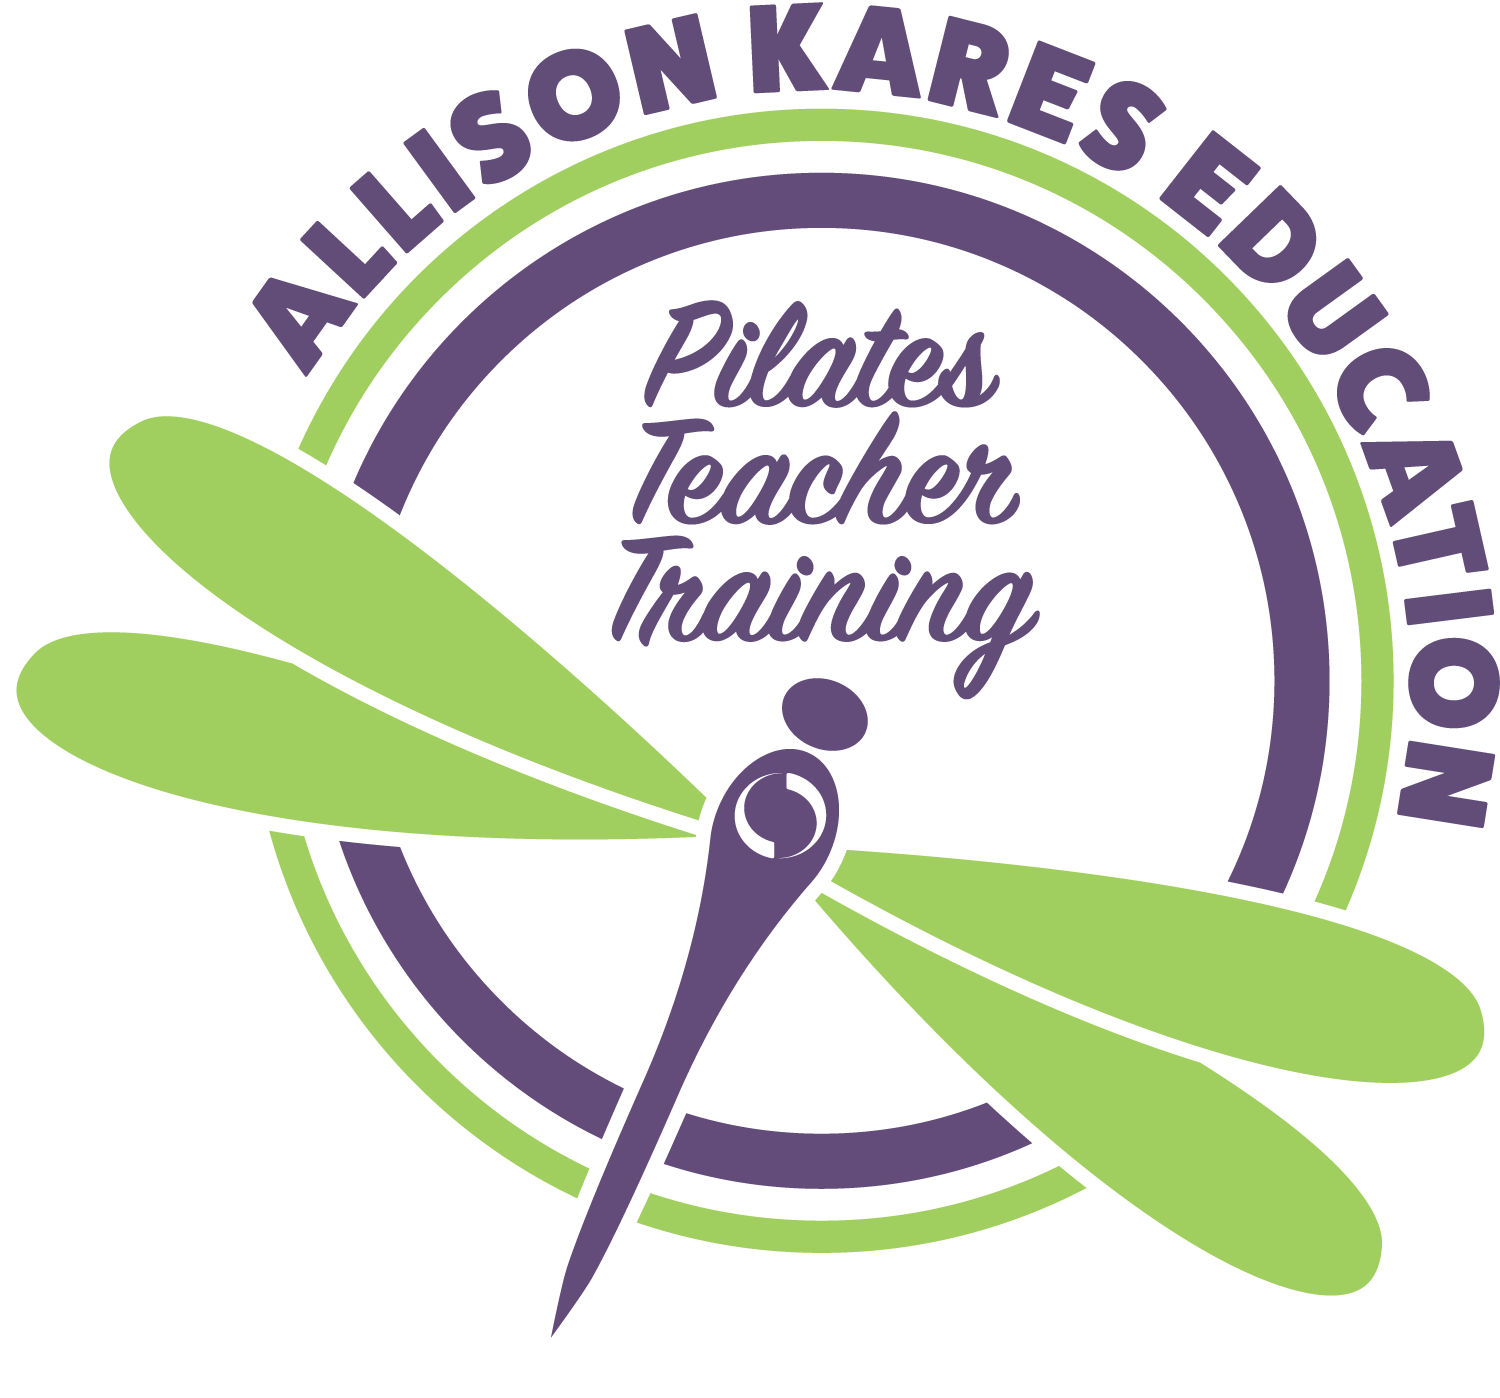 Allison Kares Education Inc. | Pilates Teacher Training |  Learn to teach Pilates and share the love and joy of movement to help others move better and feel better.